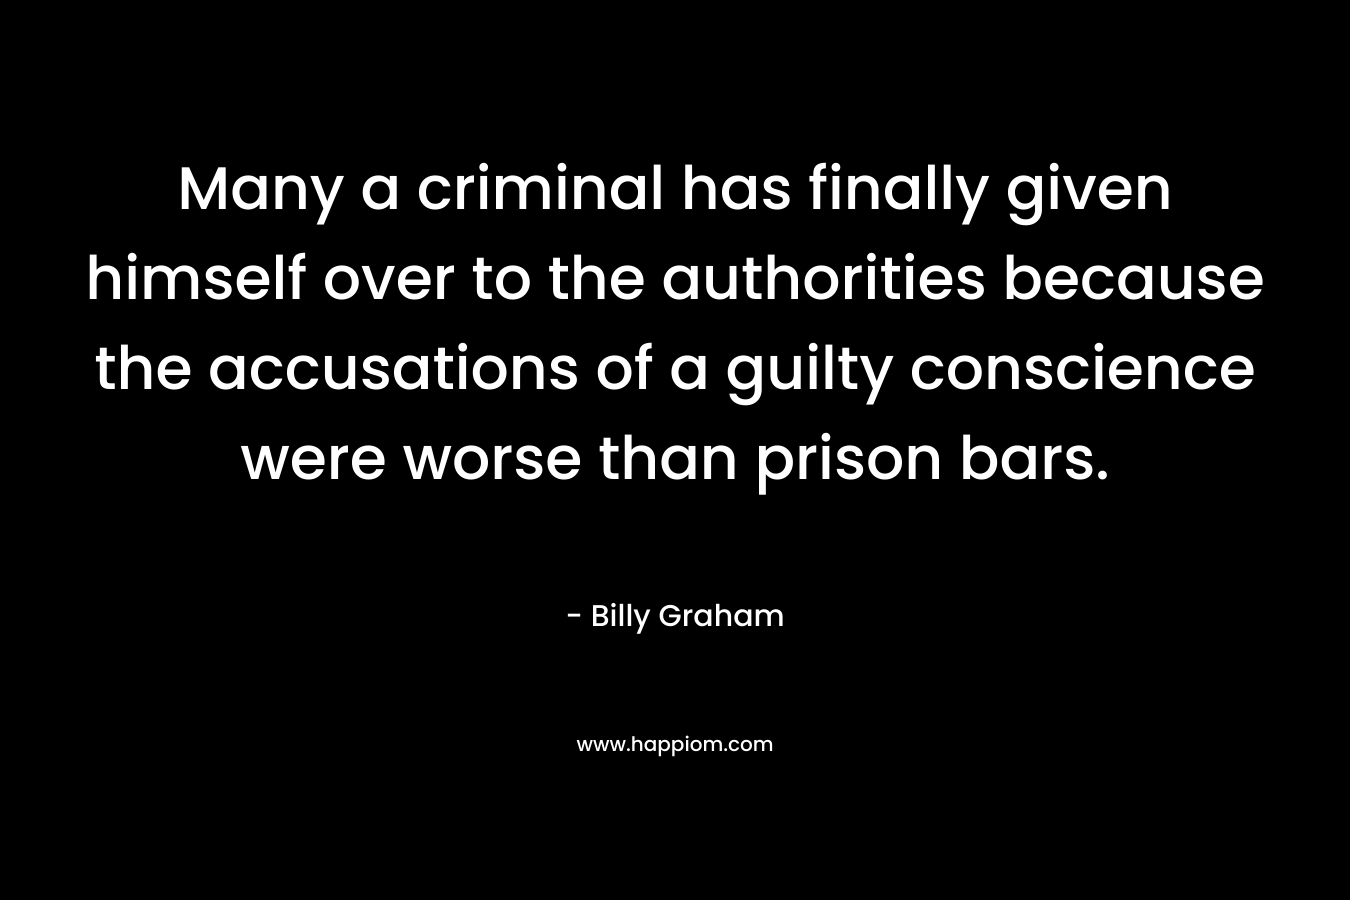 Many a criminal has finally given himself over to the authorities because the accusations of a guilty conscience were worse than prison bars. – Billy Graham